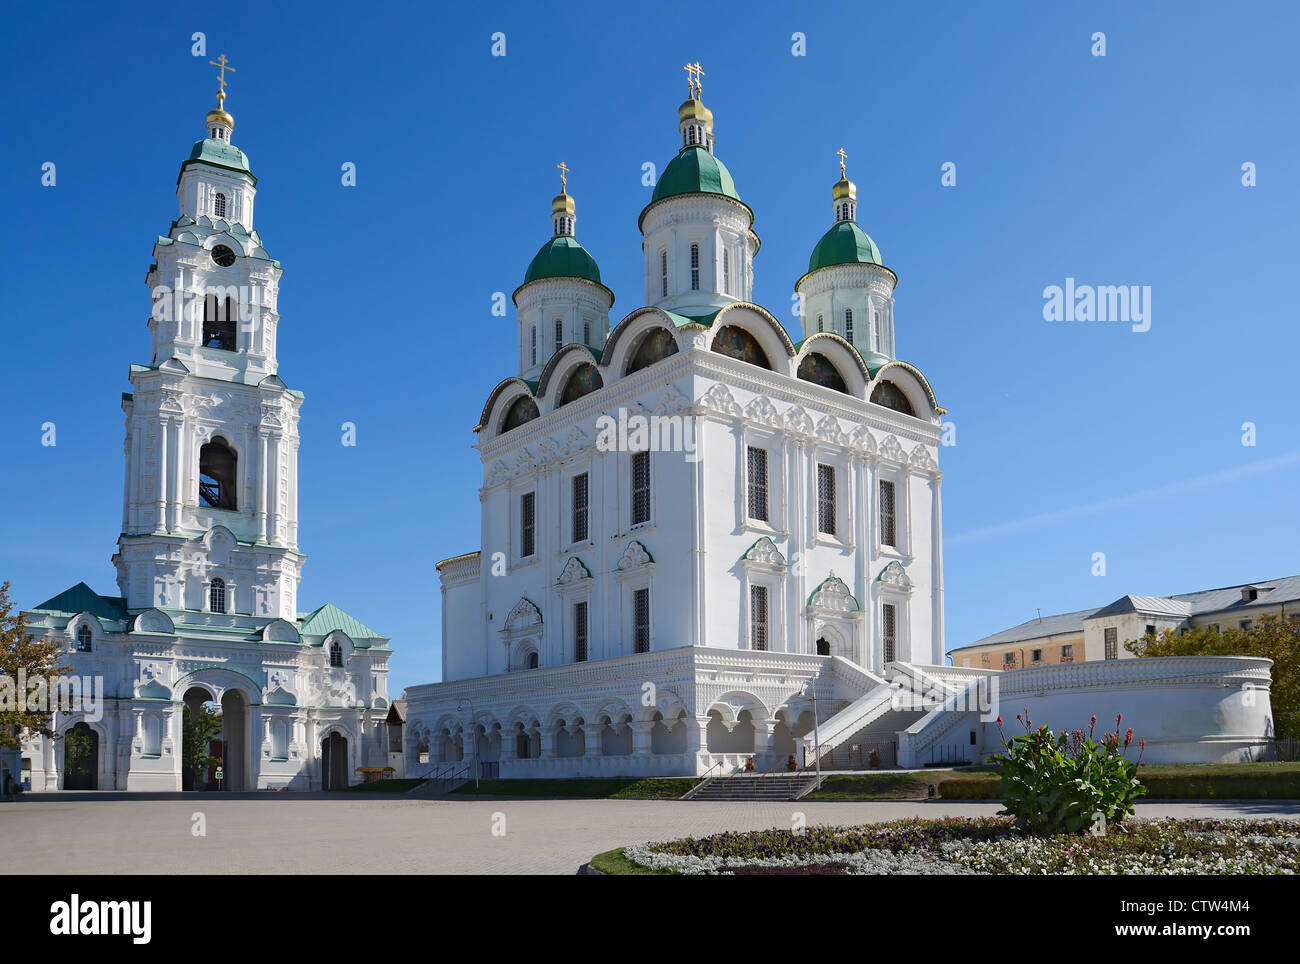 Uspensky Cathedral and Bell Tower of the Kremlin in Astrakhan, Russia Stock Photo